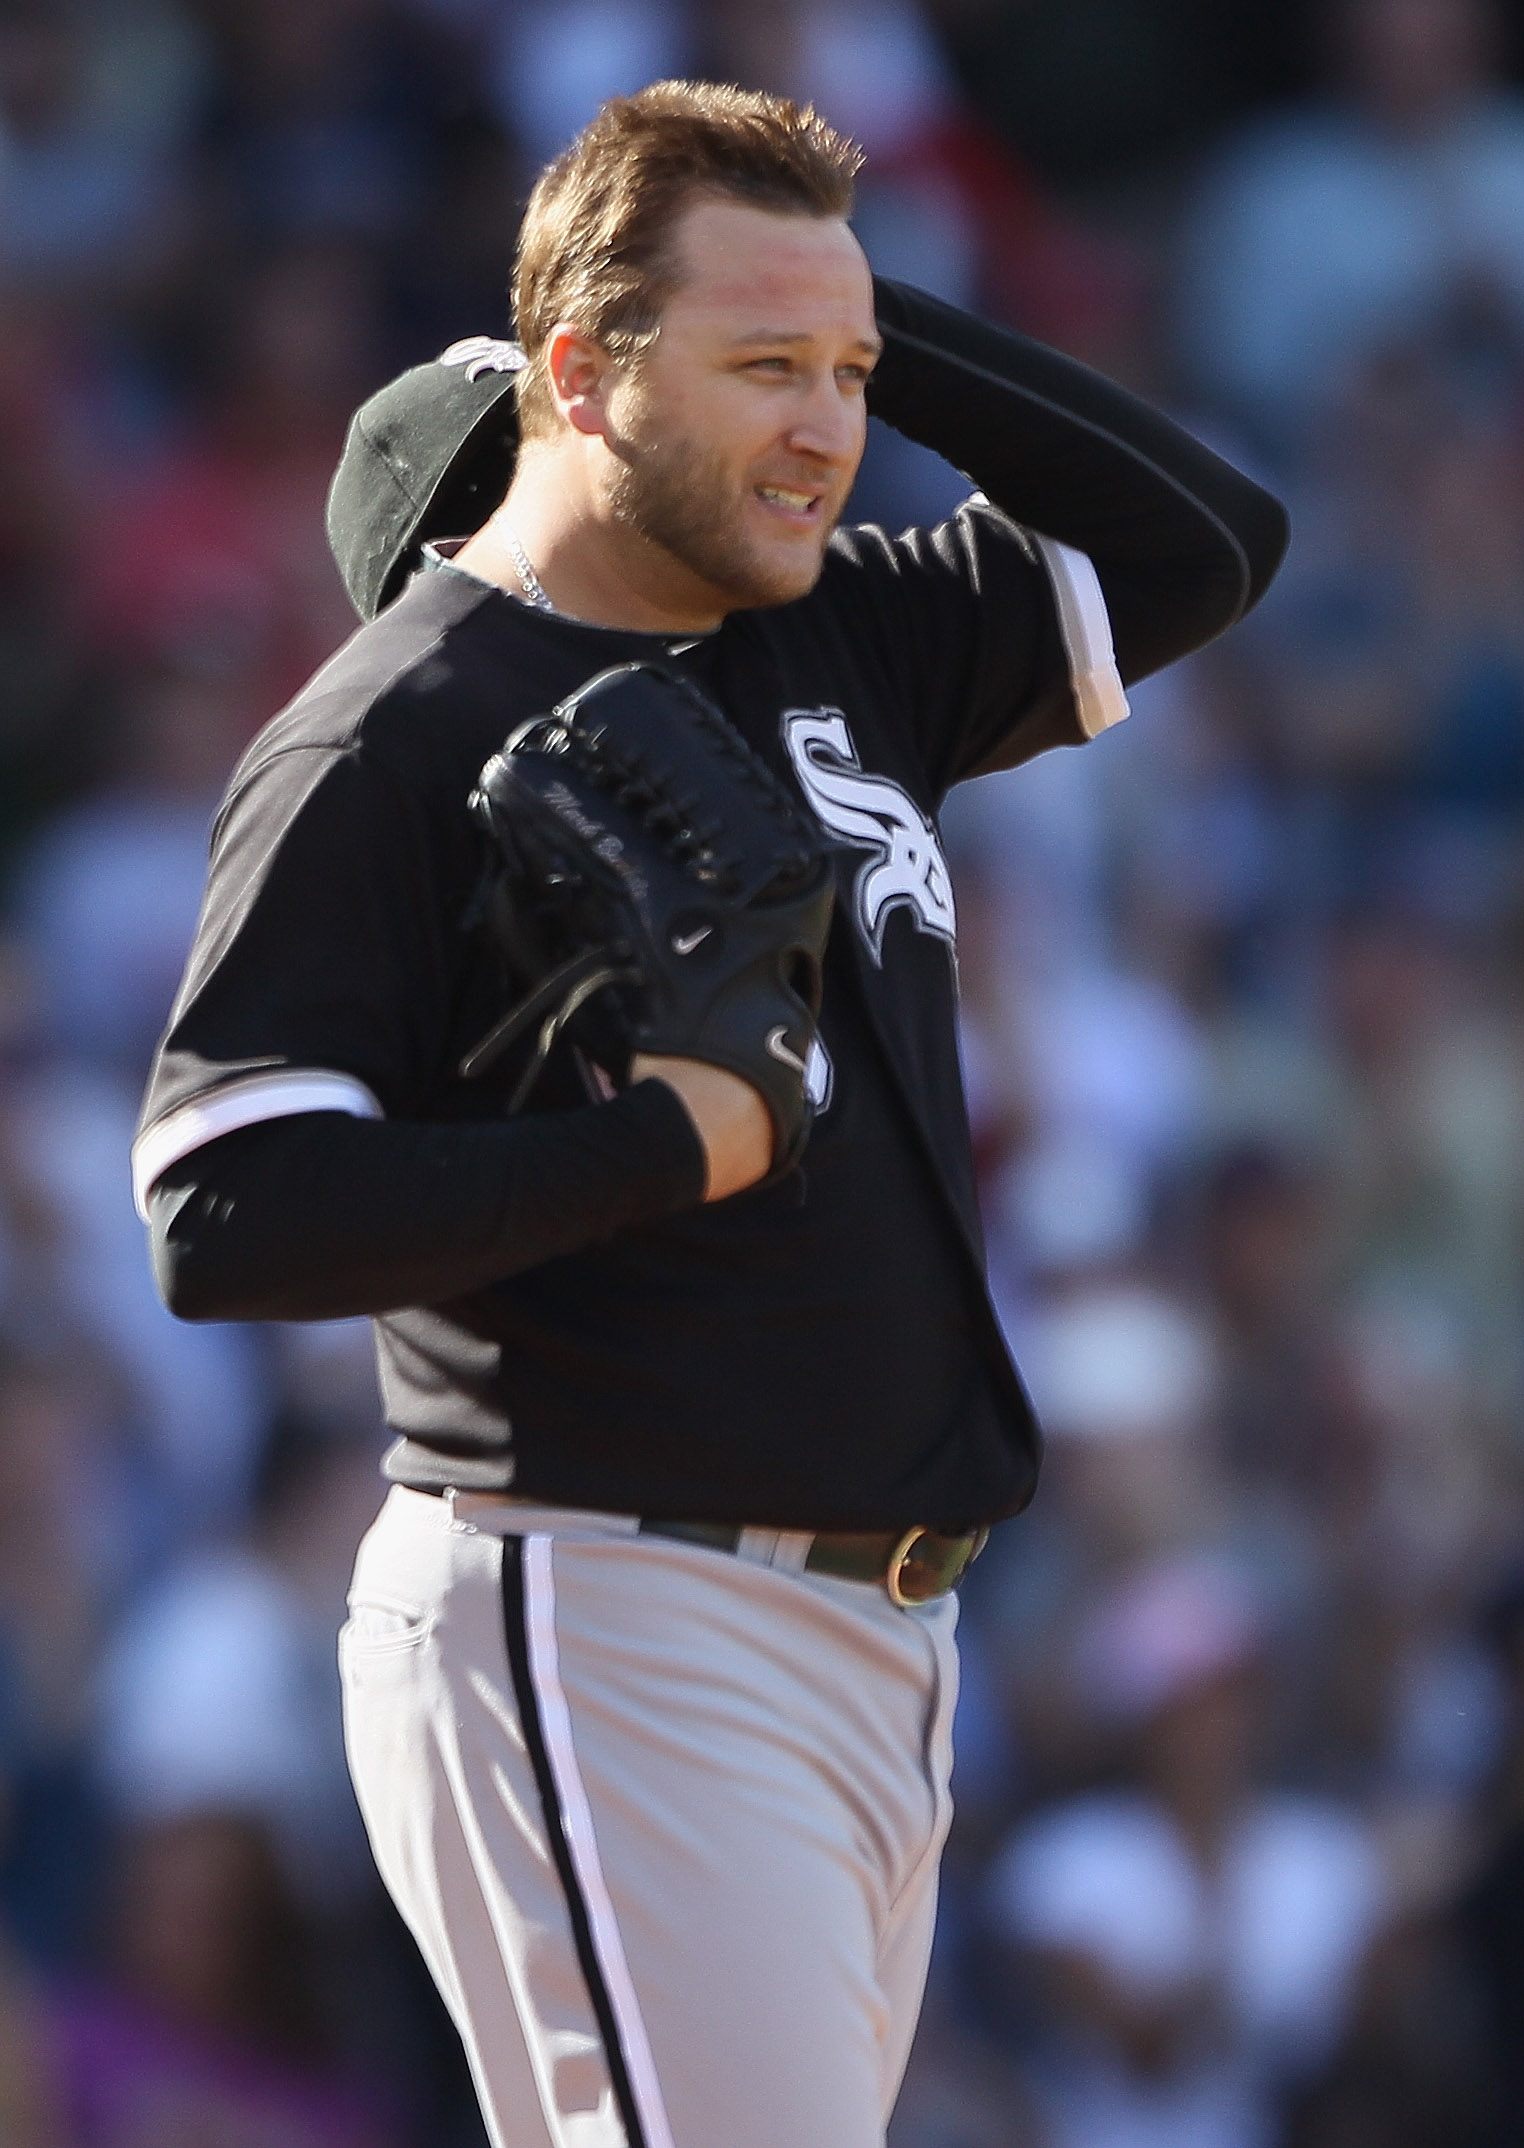 BOSTON - SEPTEMBER 05:  Mark Buehrle #56 of the Chicago White Sox reacts after giving up a two run homer to Victor Martinez of the Boston Red Sox in the seventh inning on September 5, 2010 at Fenway Park in Boston, Massachusetts.  (Photo by Elsa/Getty Ima